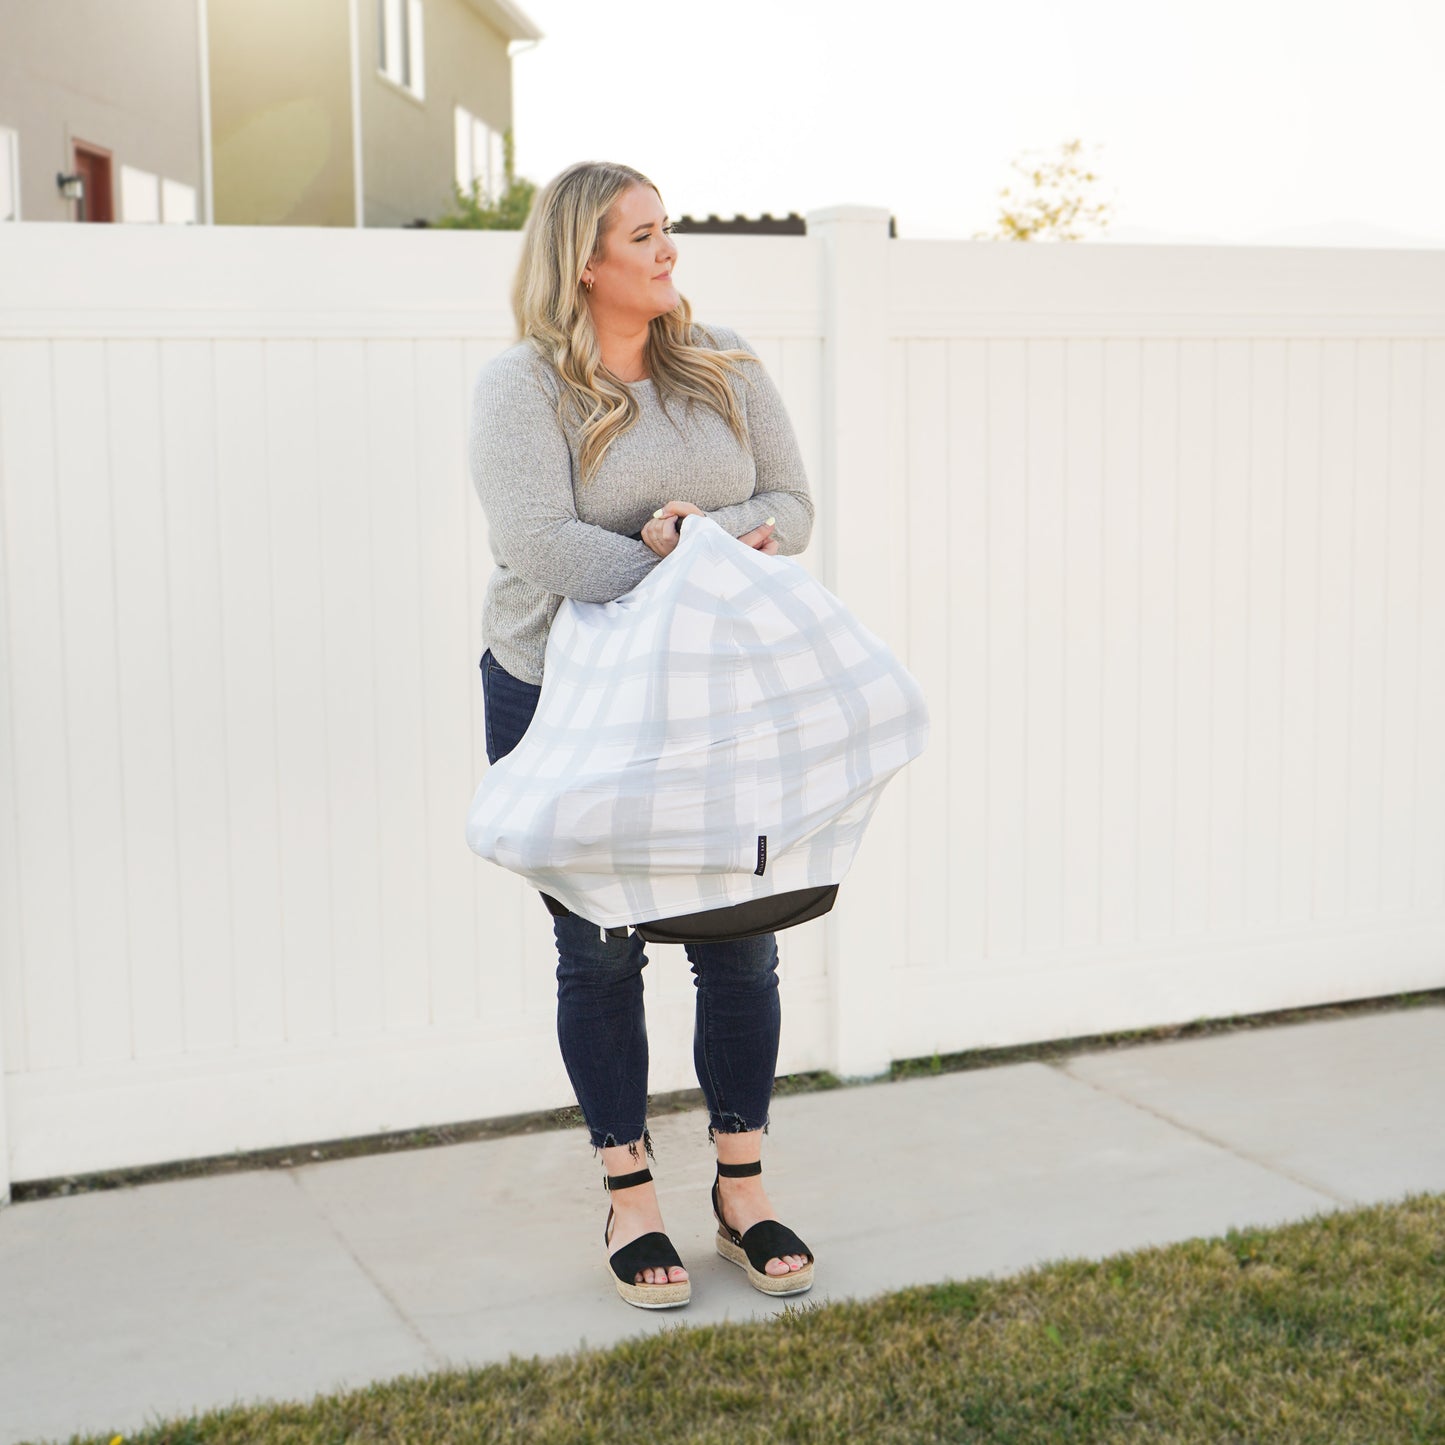 Extra Soft and Stretchy Nursing and Carseat Cover: French Gingham